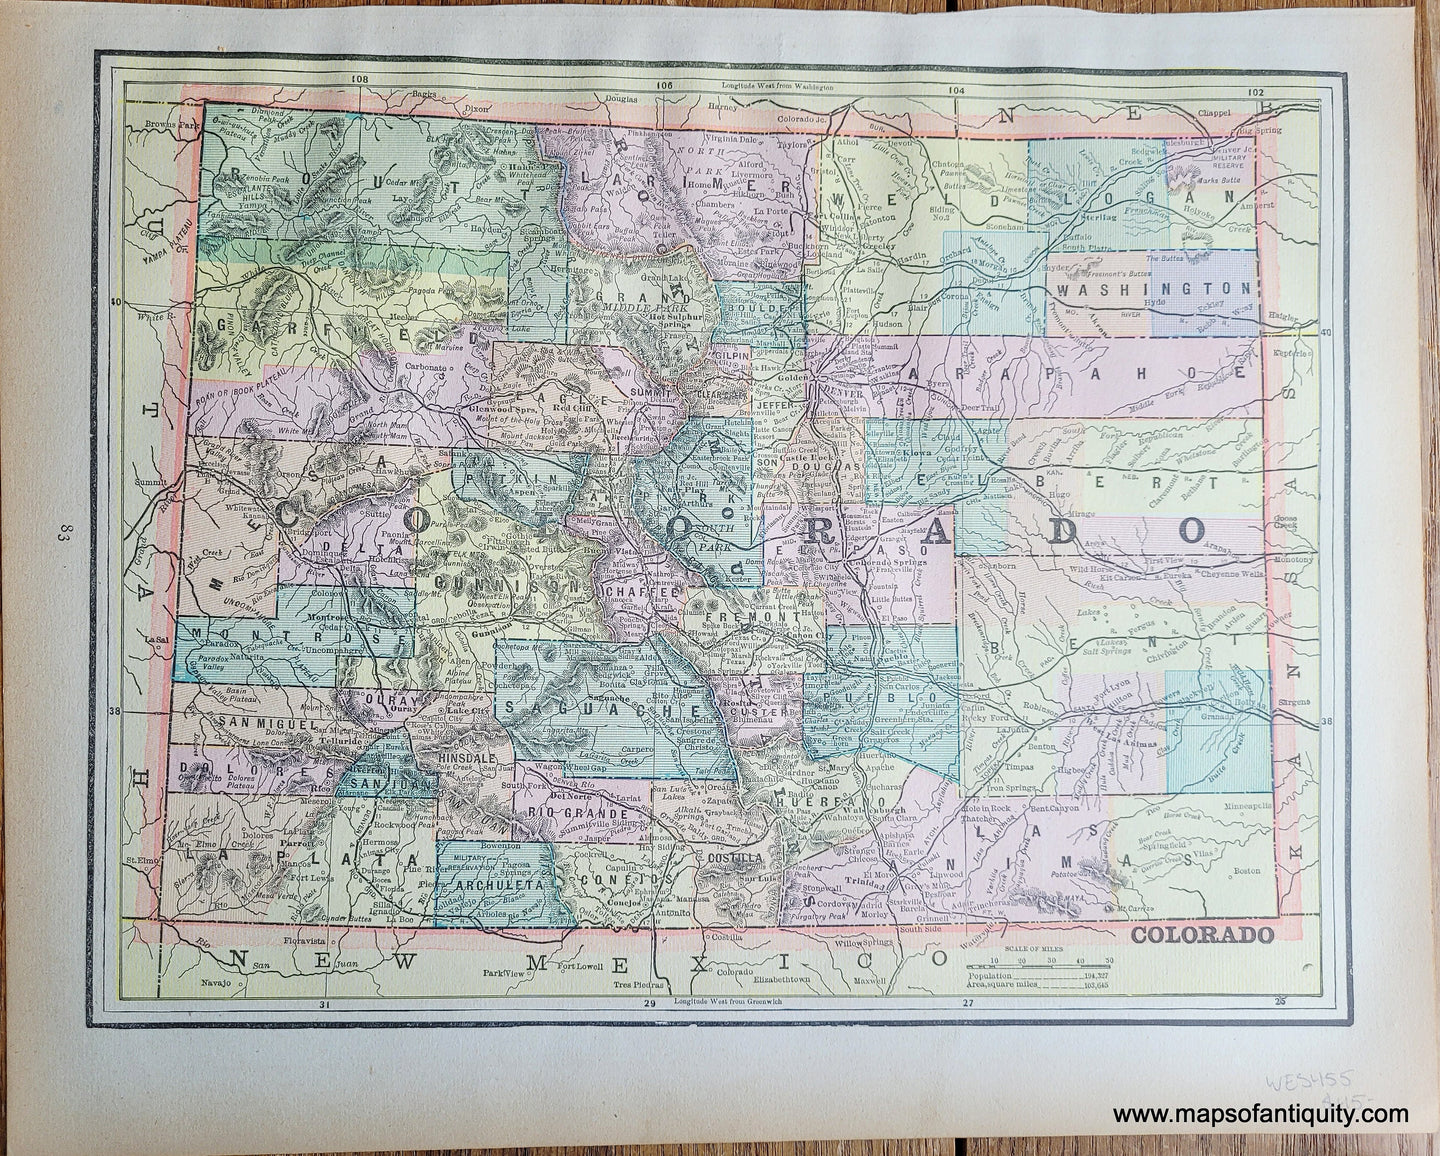 Genuine-Antique-Printed-Color-Map-Double-sided-page-Colorado-verso-Oregon-1893-Gaskell-Maps-Of-Antiquity